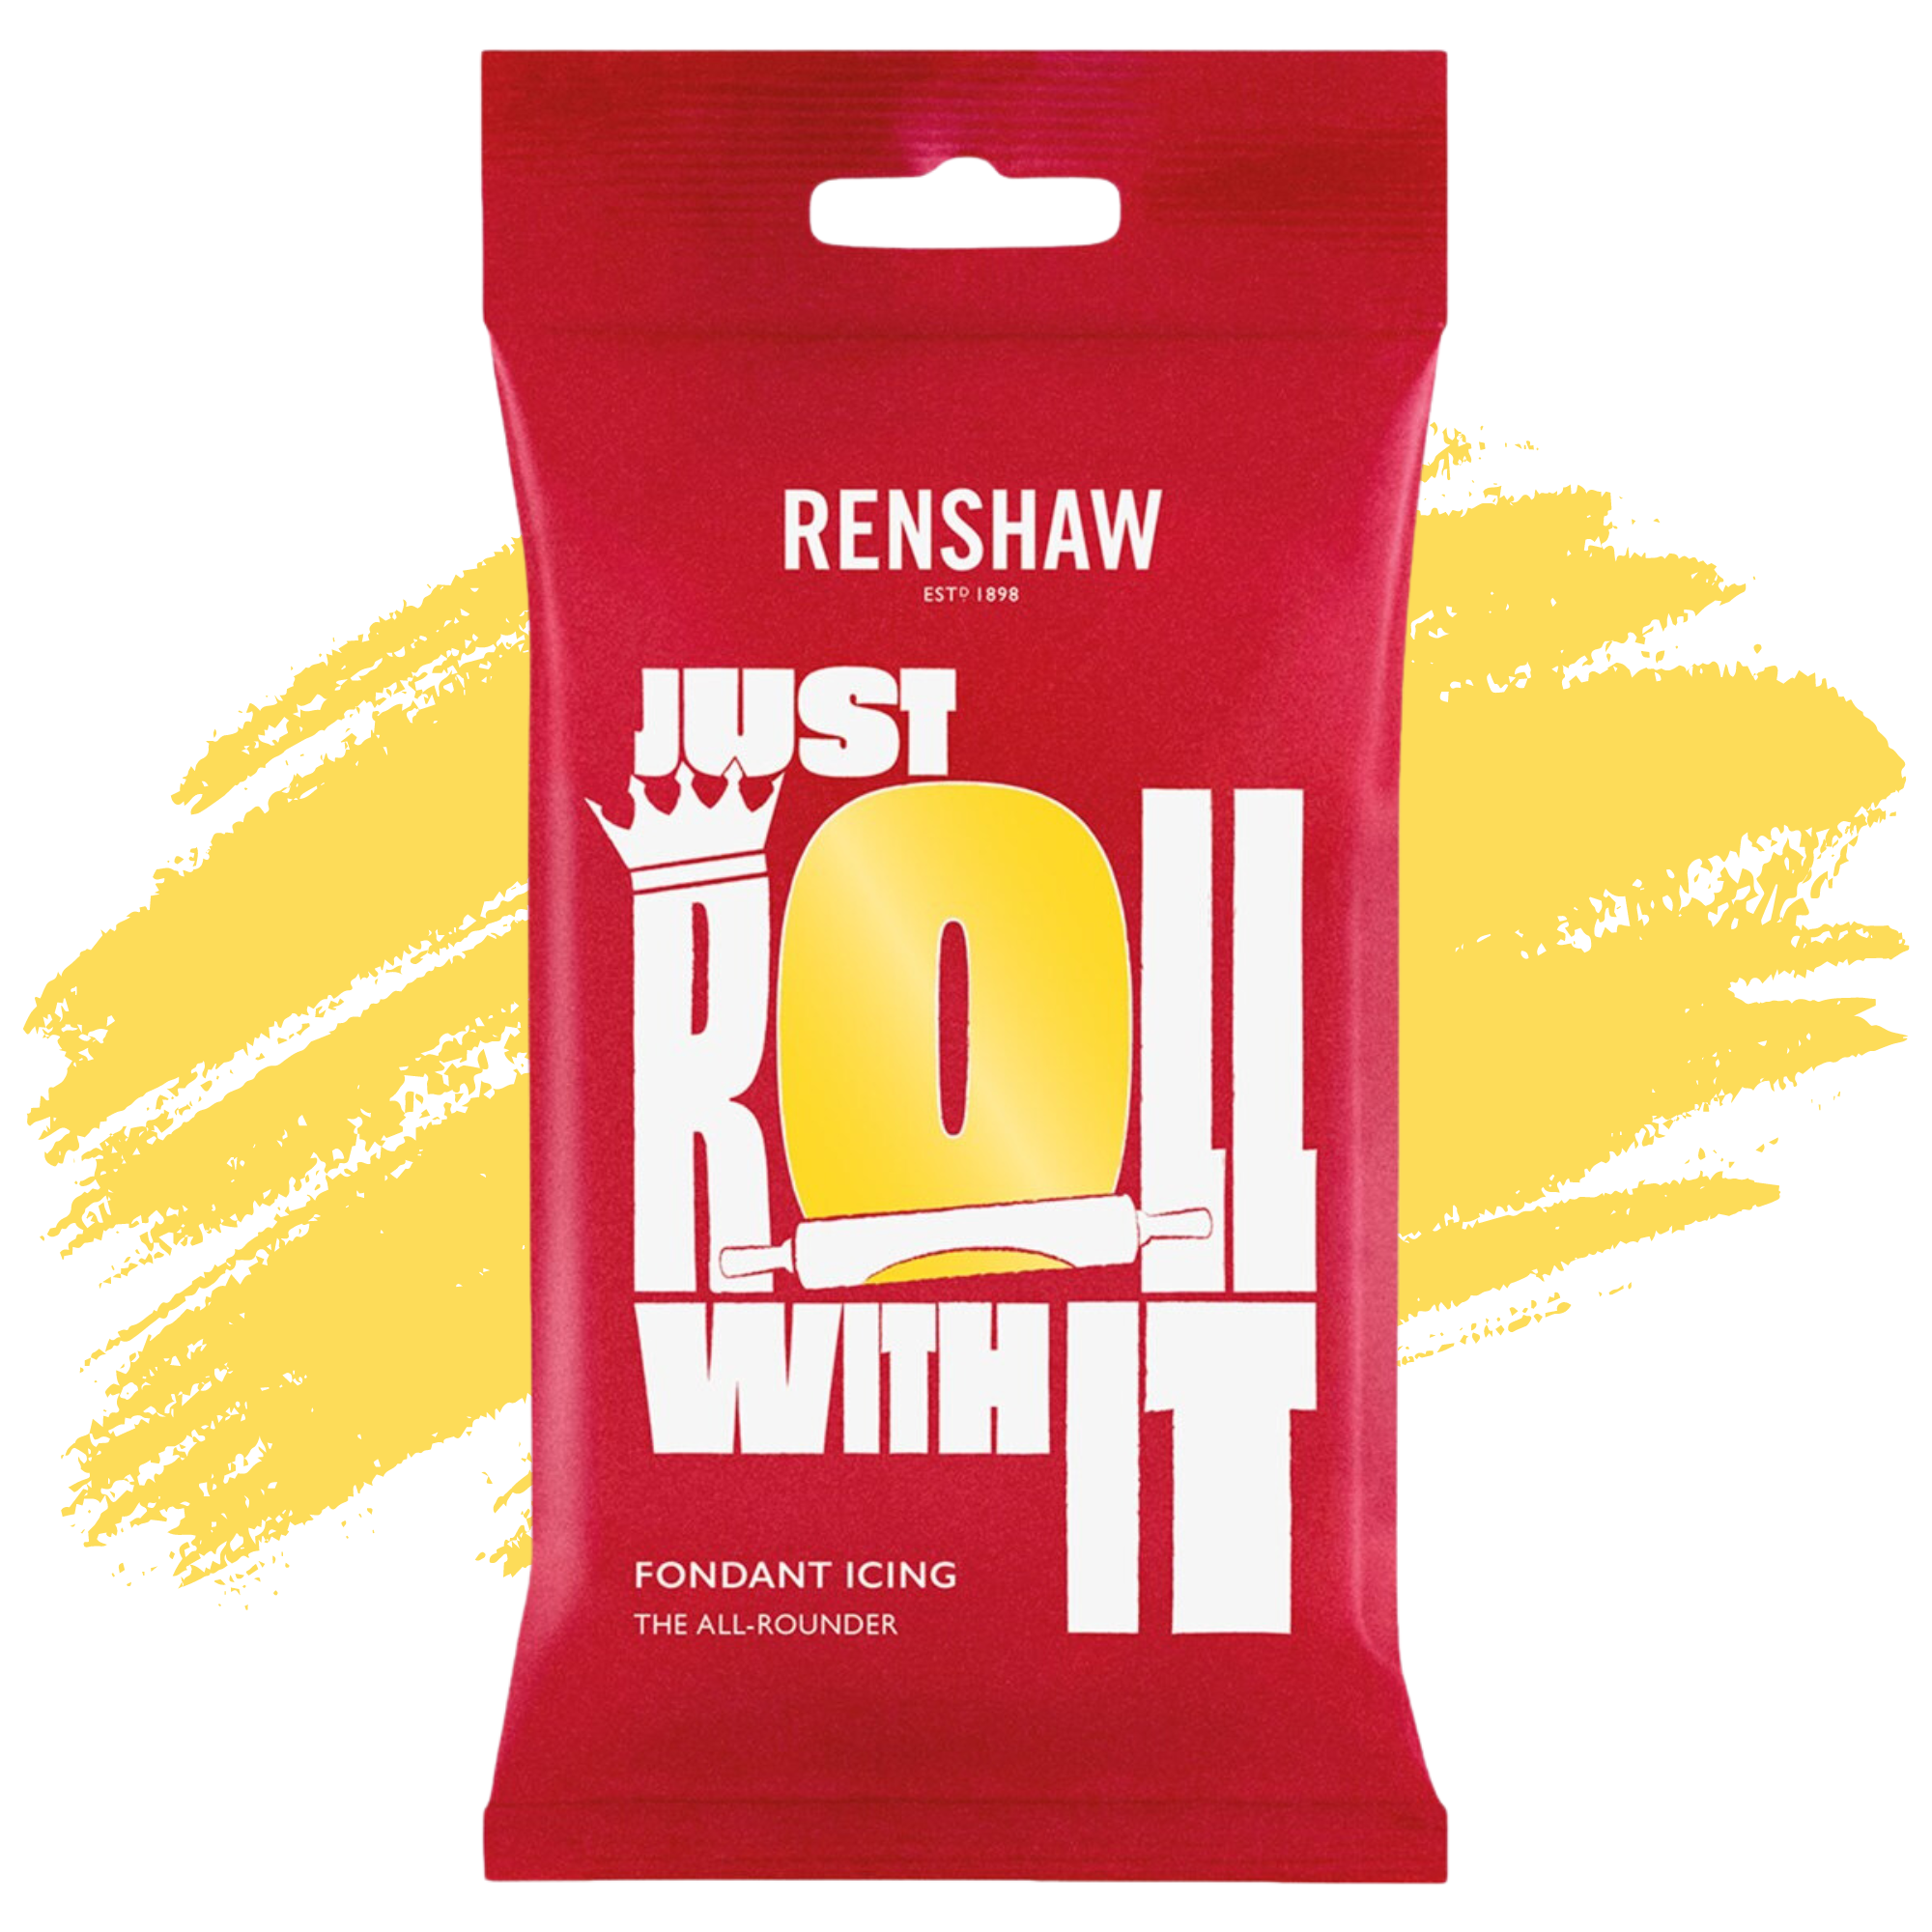 Renshaw Professional Sugar Paste Ready to Roll Fondant Just Roll with it Icing - Yellow - 250g